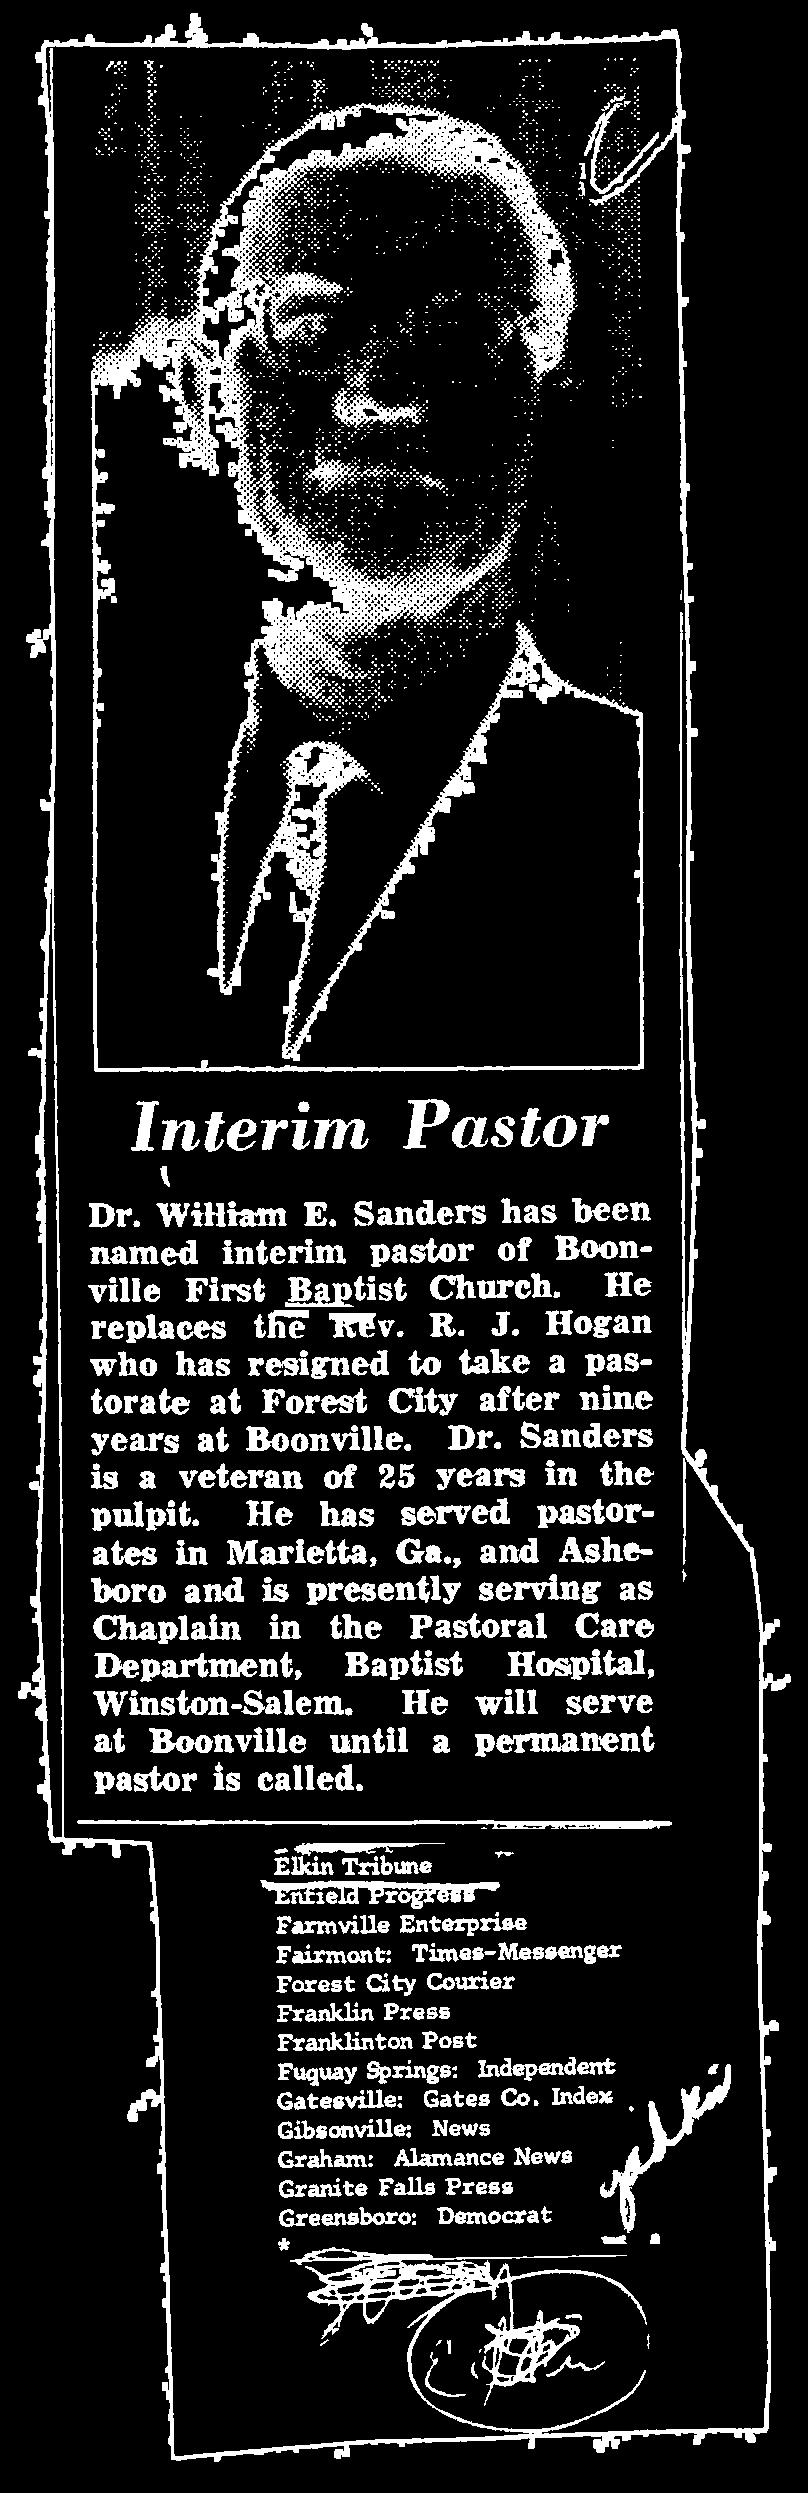 He will serve at Boonville until a permanent pastor is called.